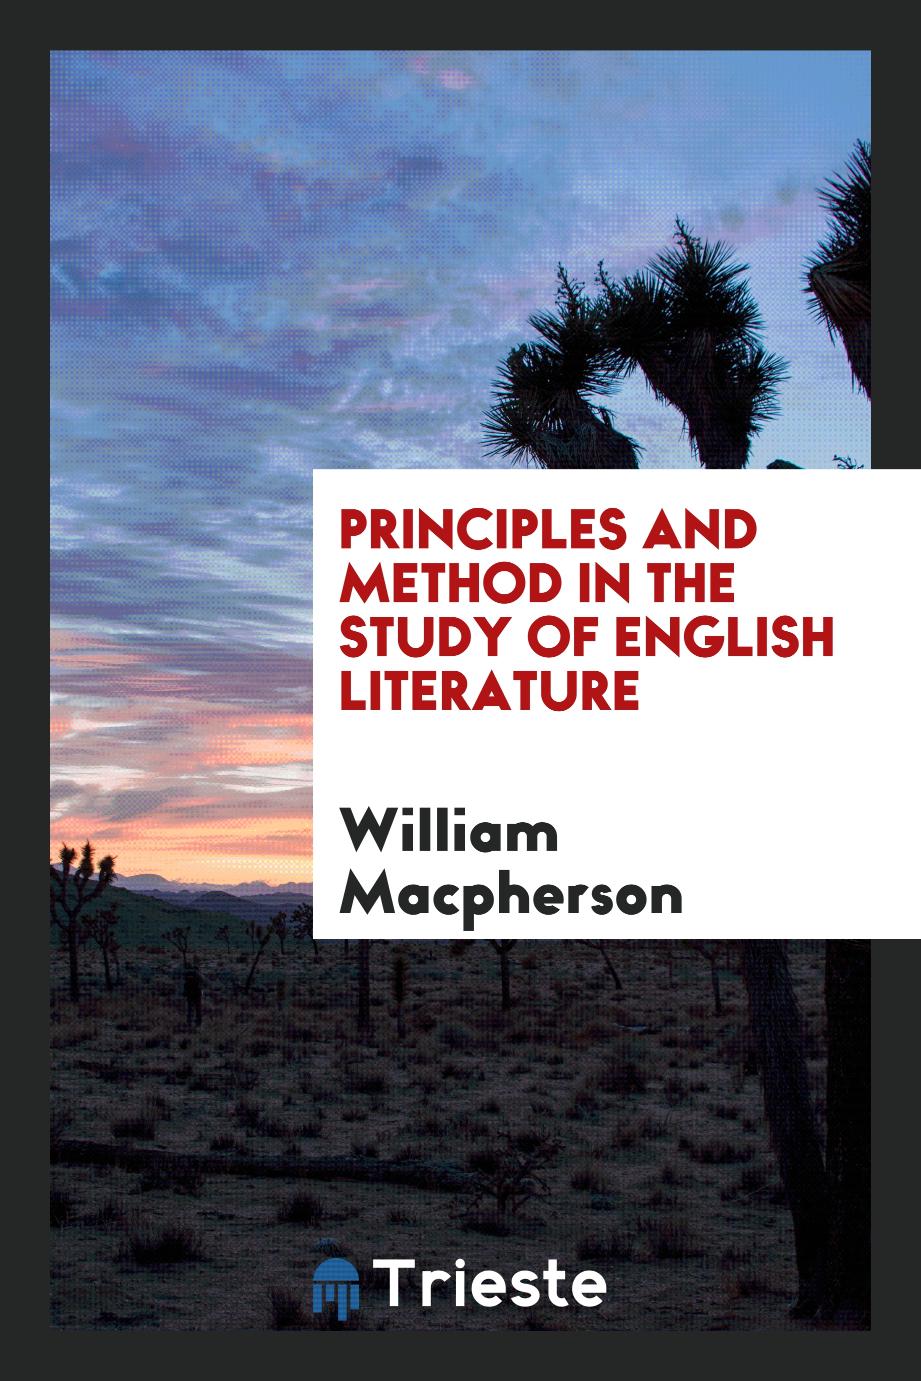 Principles and method in the study of English literature